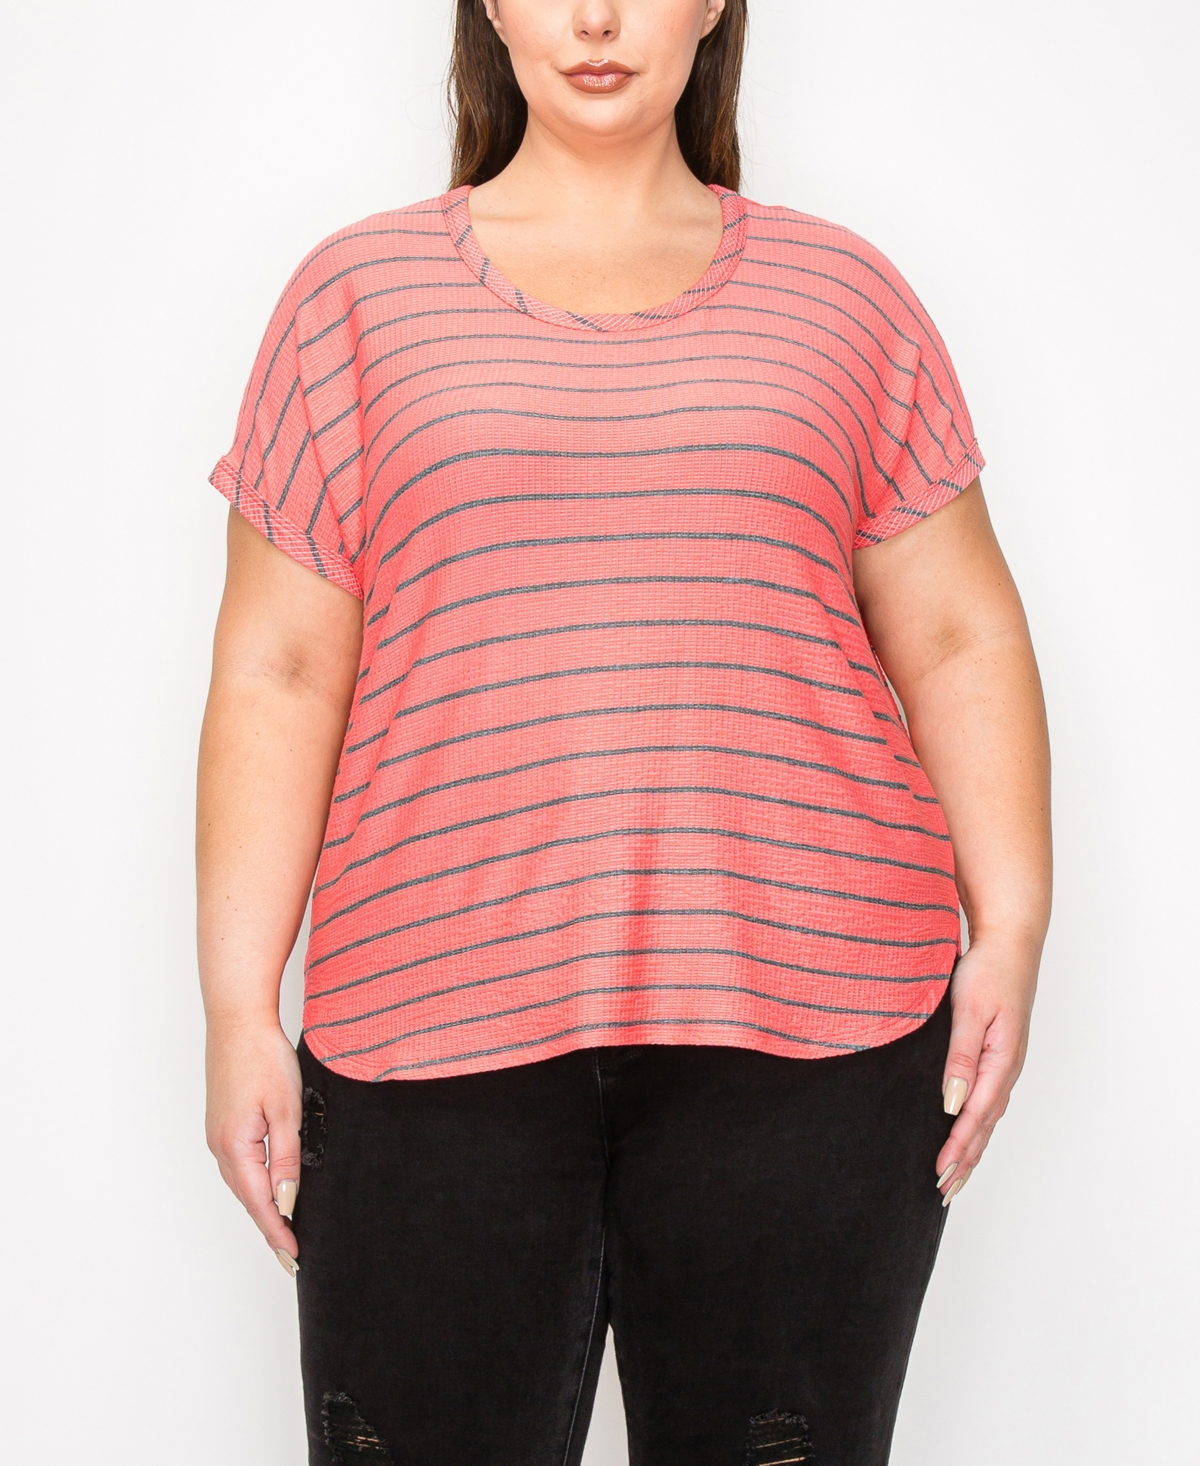 Coin 1804 Plus Size Pointelle Stripe Dolman Short Sleeve Top In Coral Charcoal